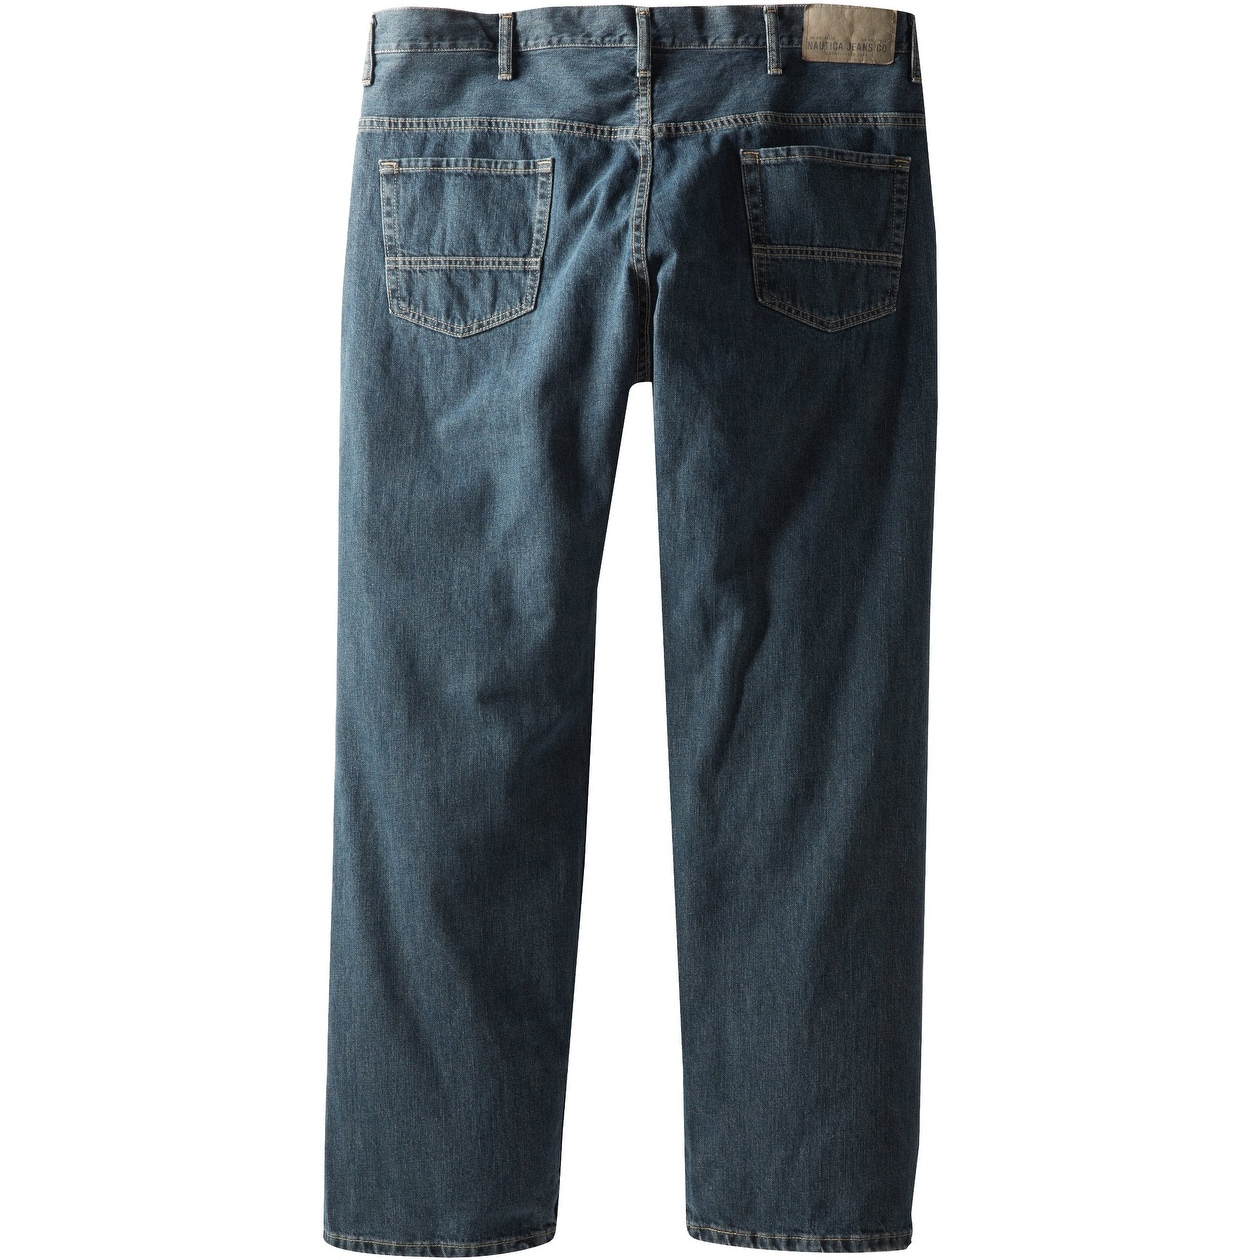 nautica mens jeans relaxed fit